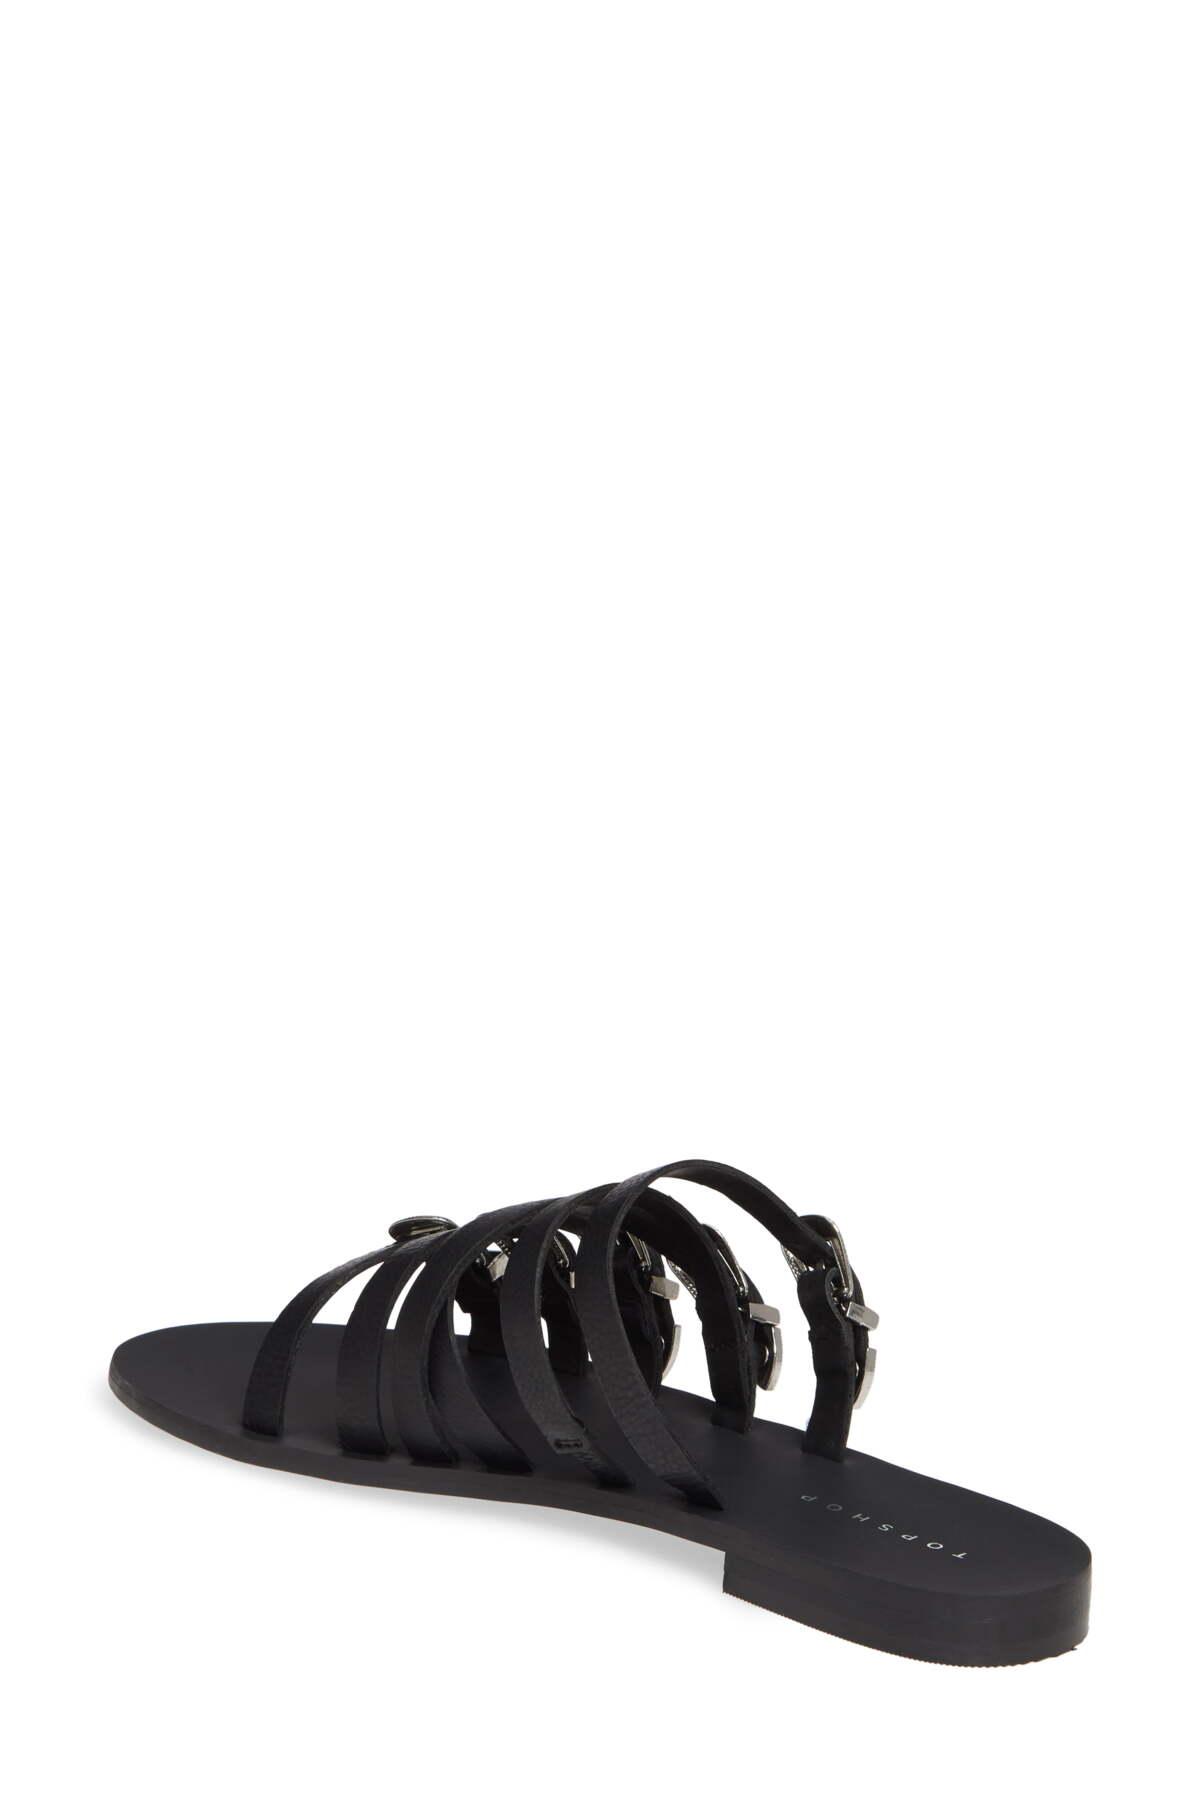 TOPSHOP Heston Leather Buckle Sandals in Black | Lyst